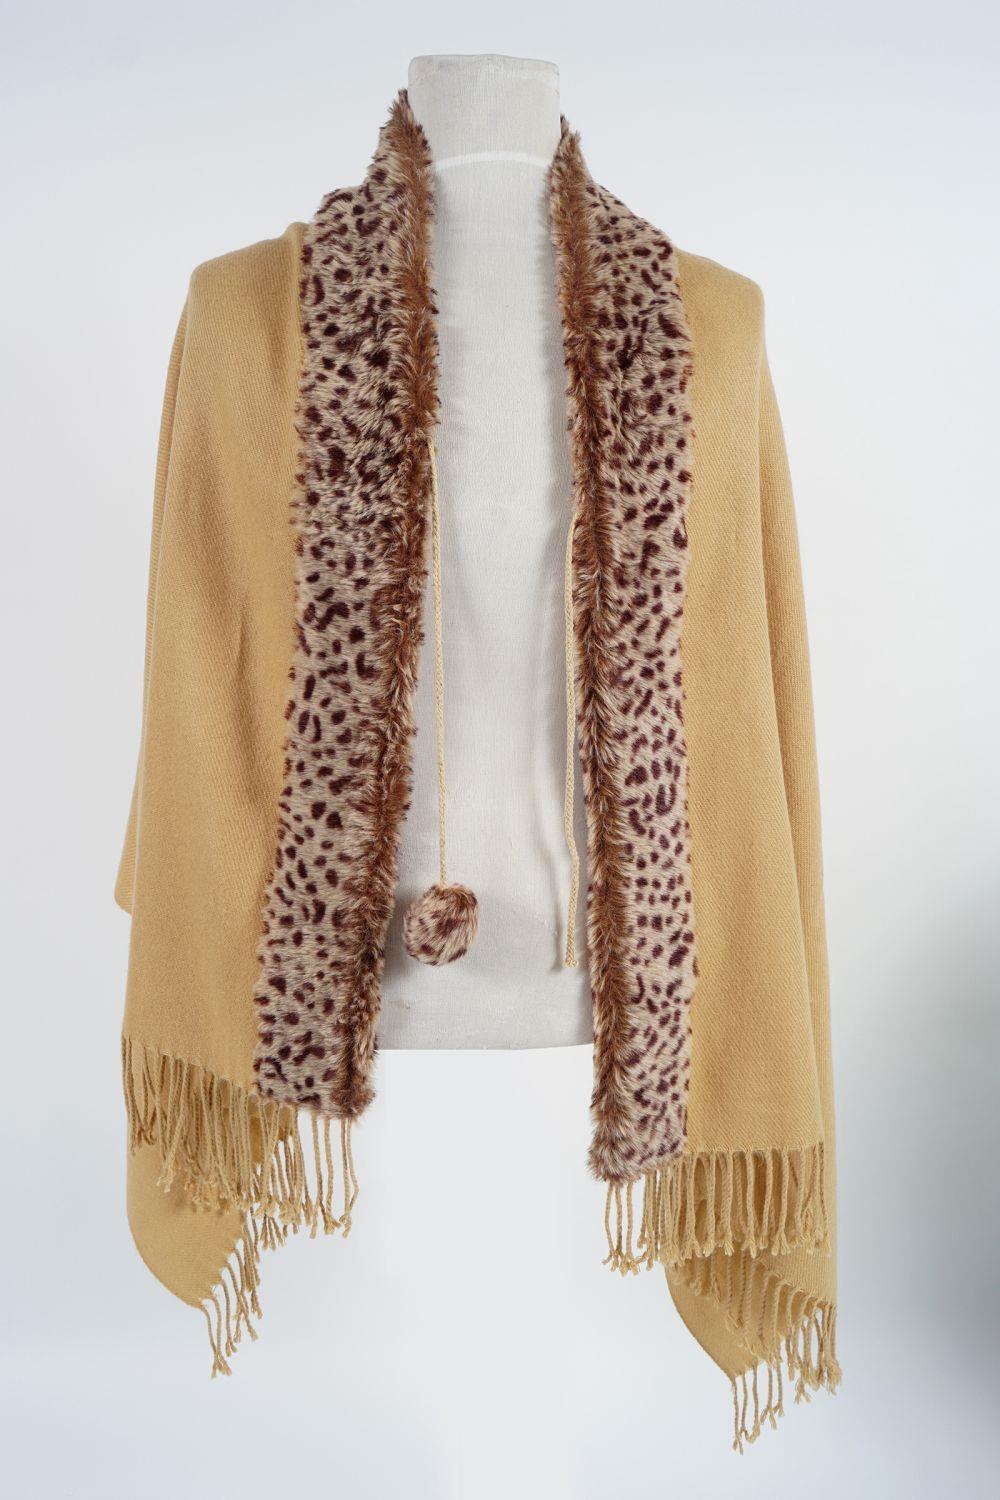 BISCUIT COLOURED WOOL STOLE